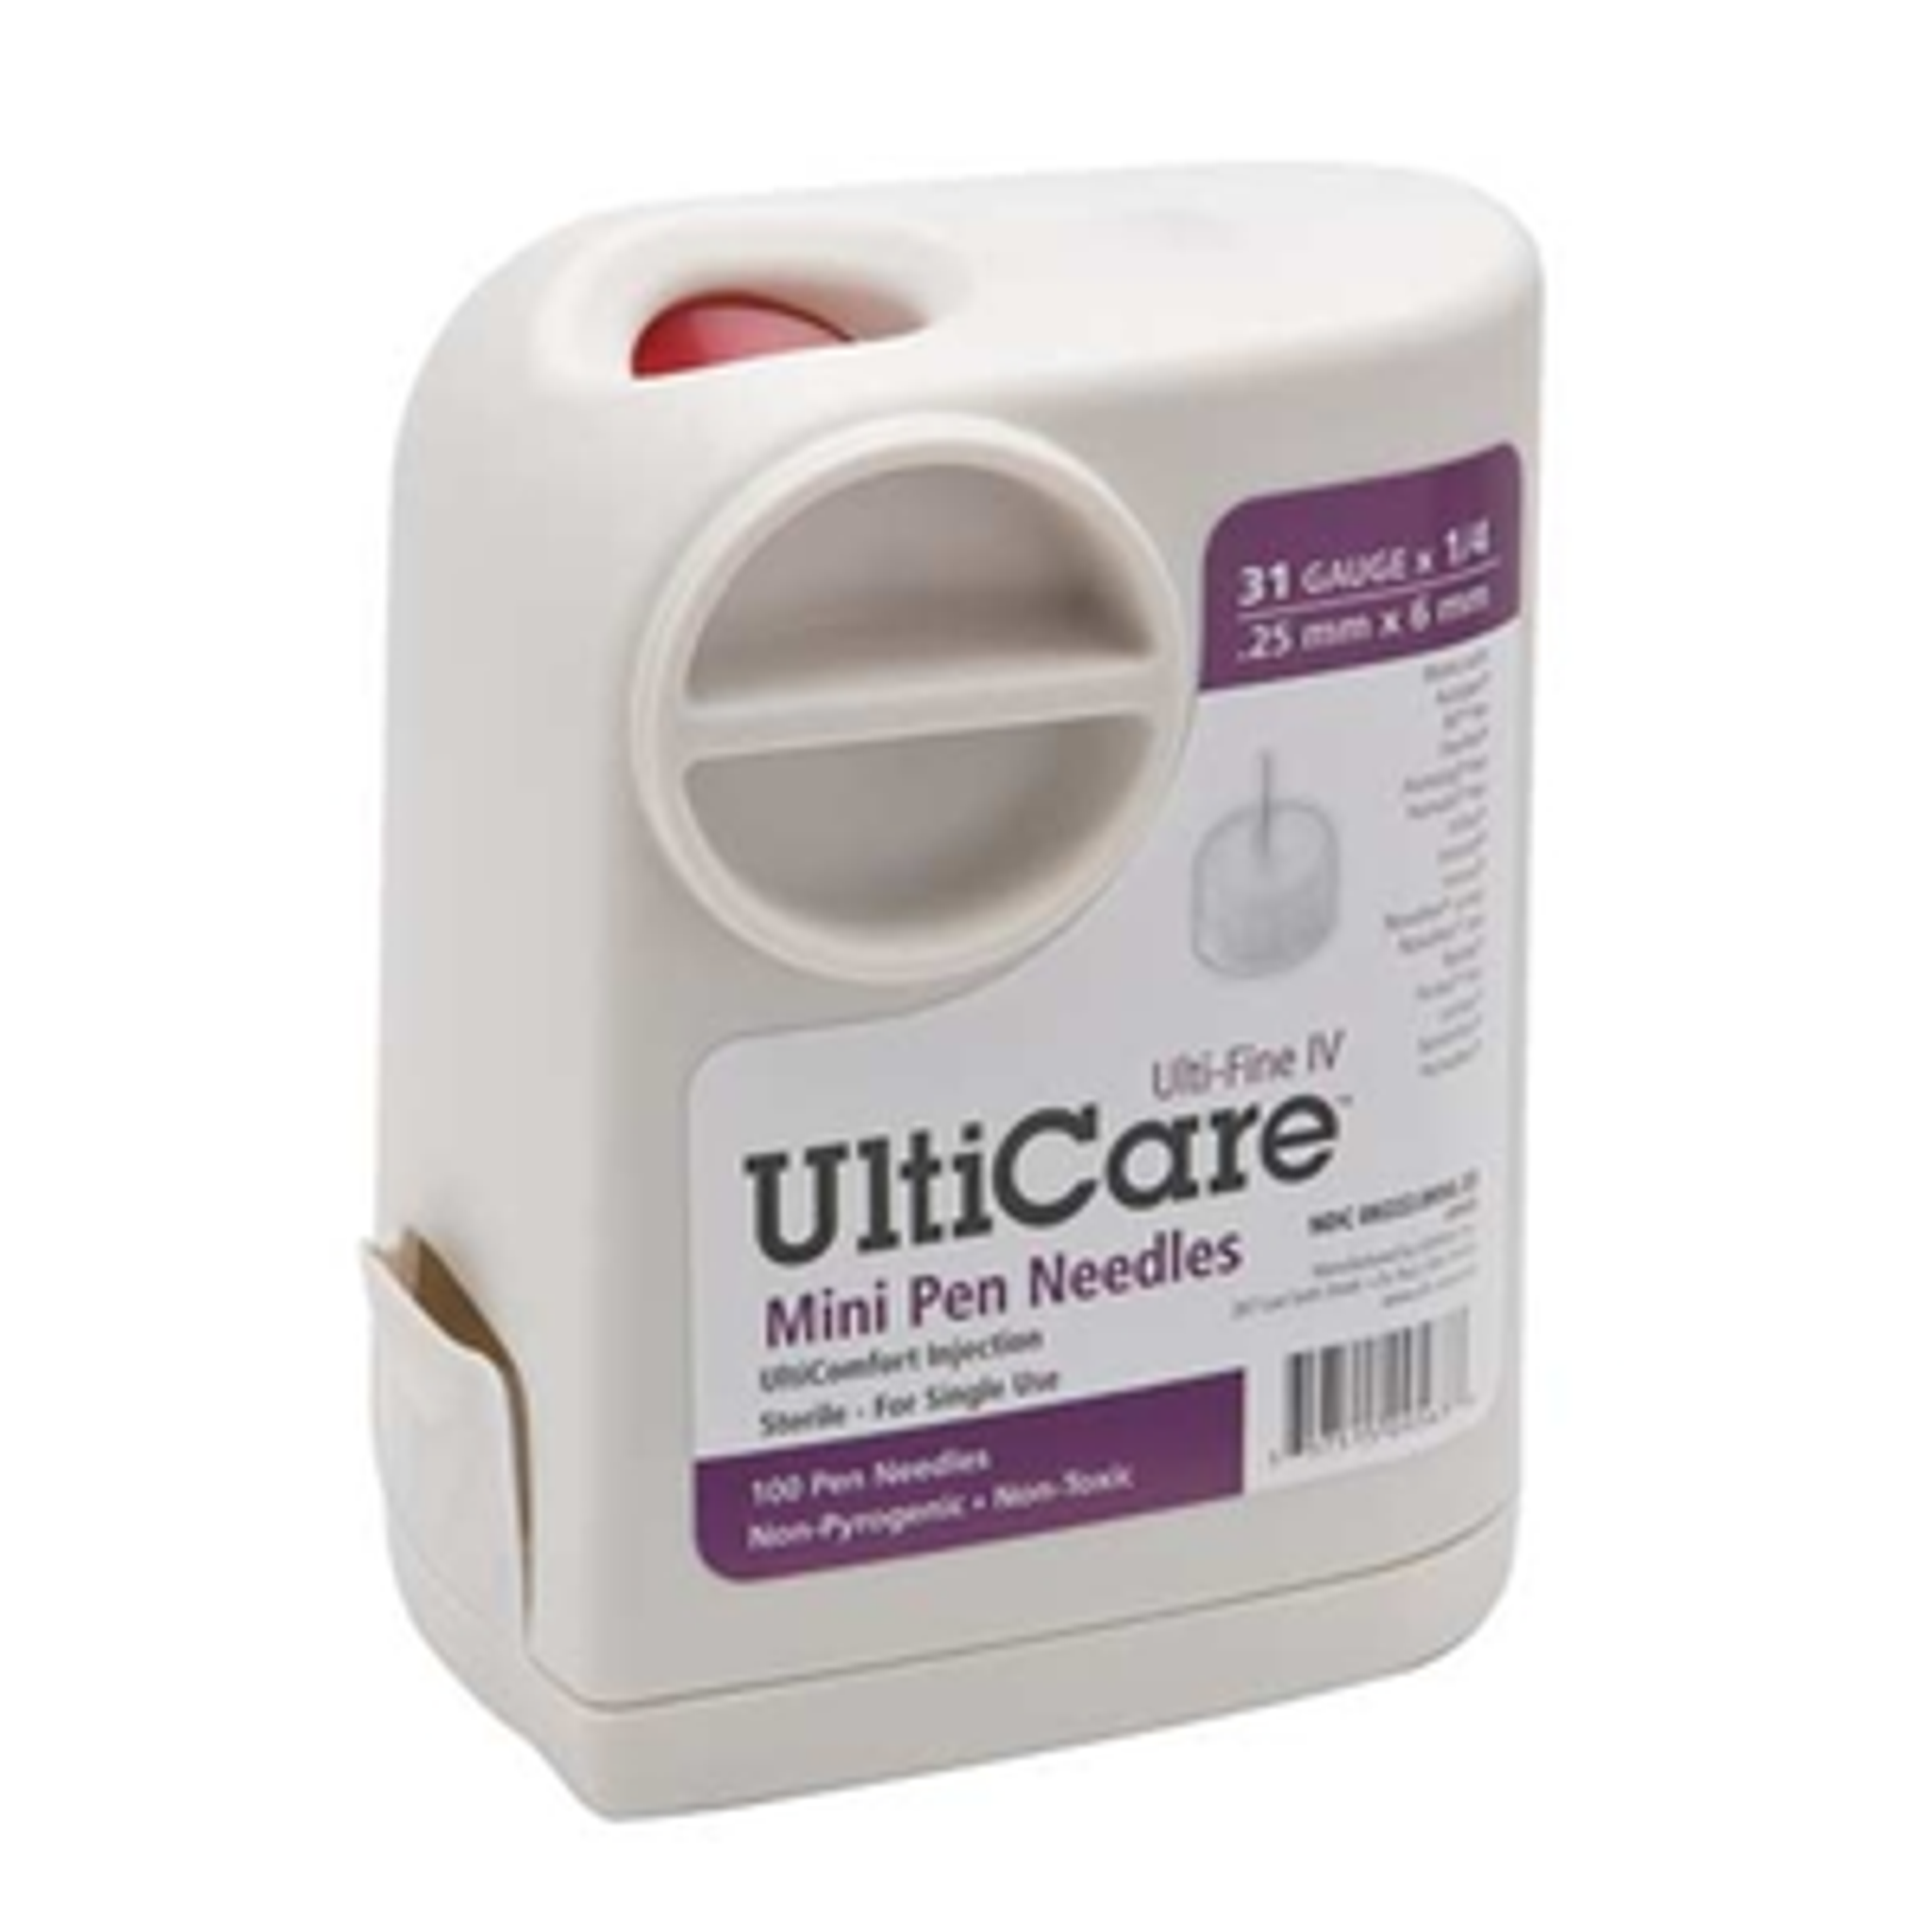 UltiCare UltiGuard Diabetic Pen Needles 31G X 6mm 1/4IN Box of 100 Insulin Needles, Pen Needles and Syringes